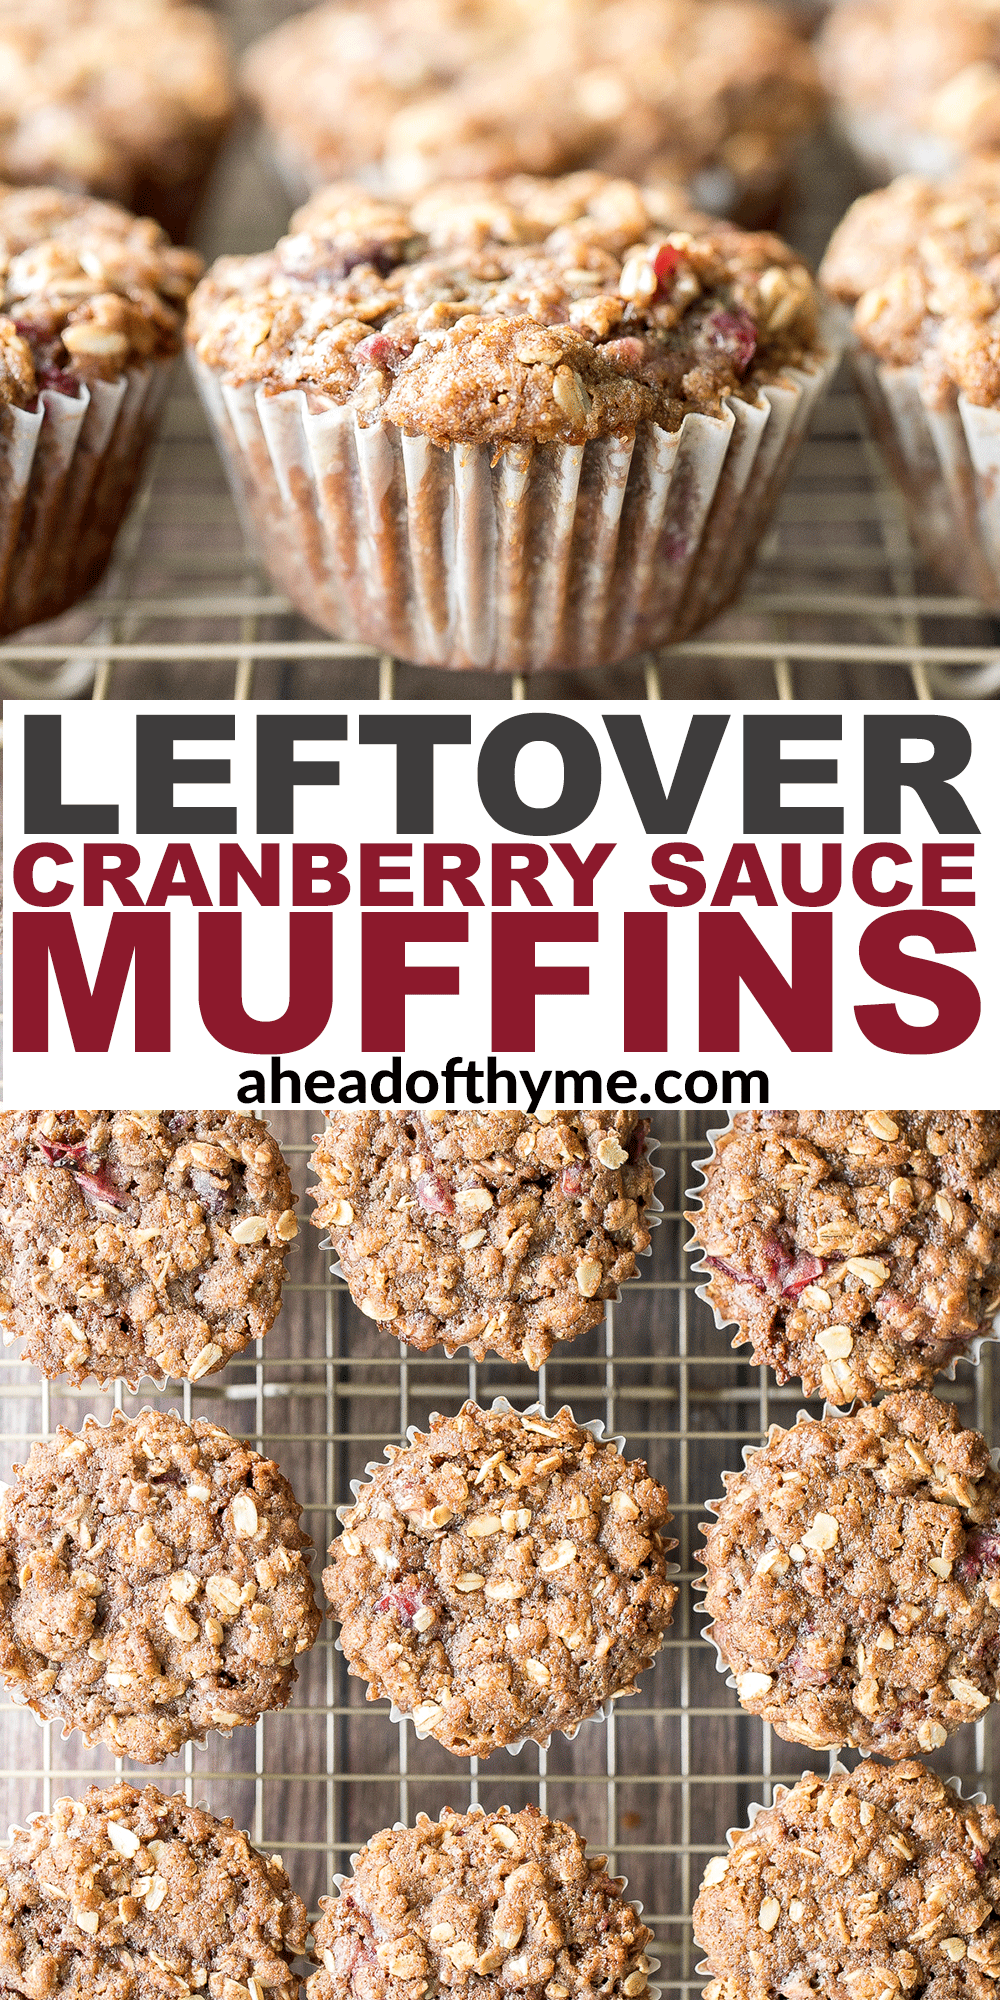 Leftover Cranberry Sauce Muffins with Oat Streusel Topping